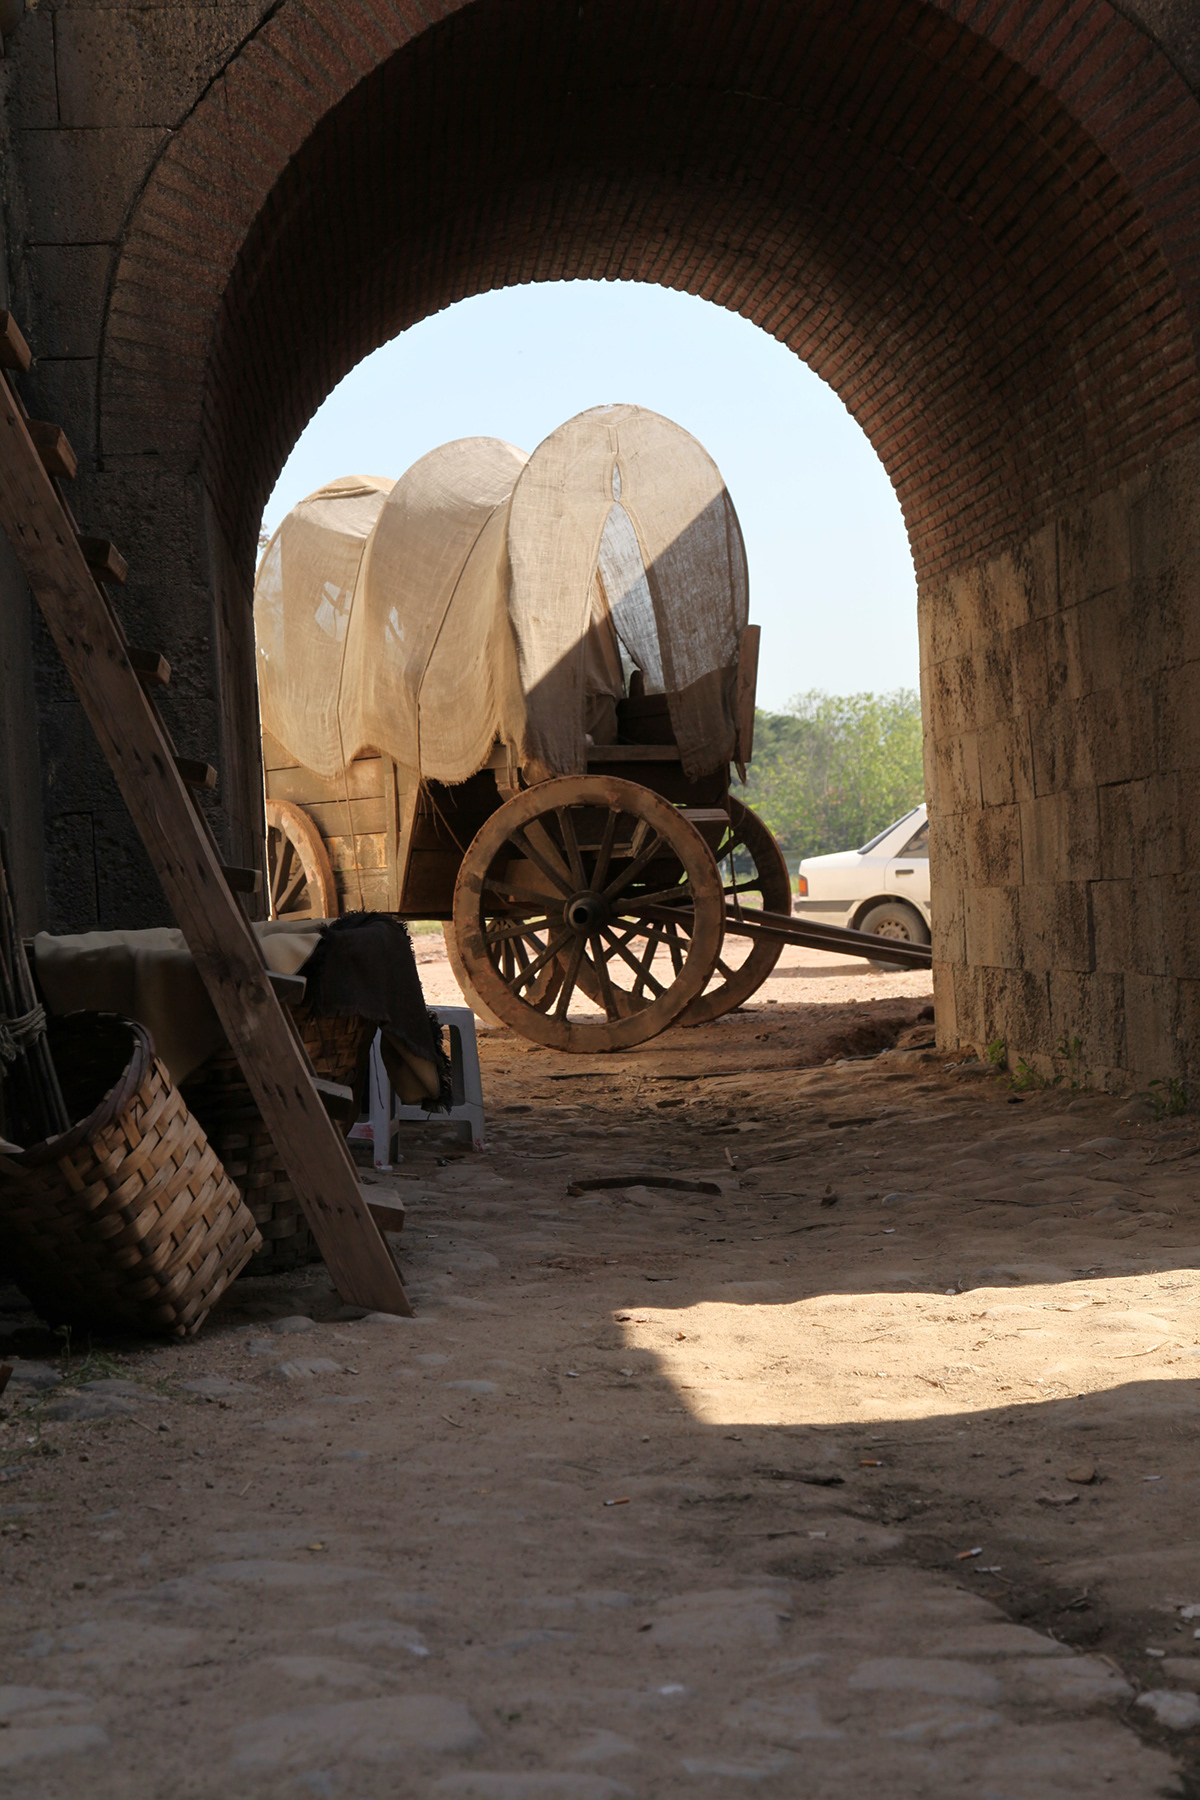 Ox Cart horse cart obsolete covered wagon stagecoach wheel history past old-fashioned transportation horsedrawn Land Vehicle Vehicle